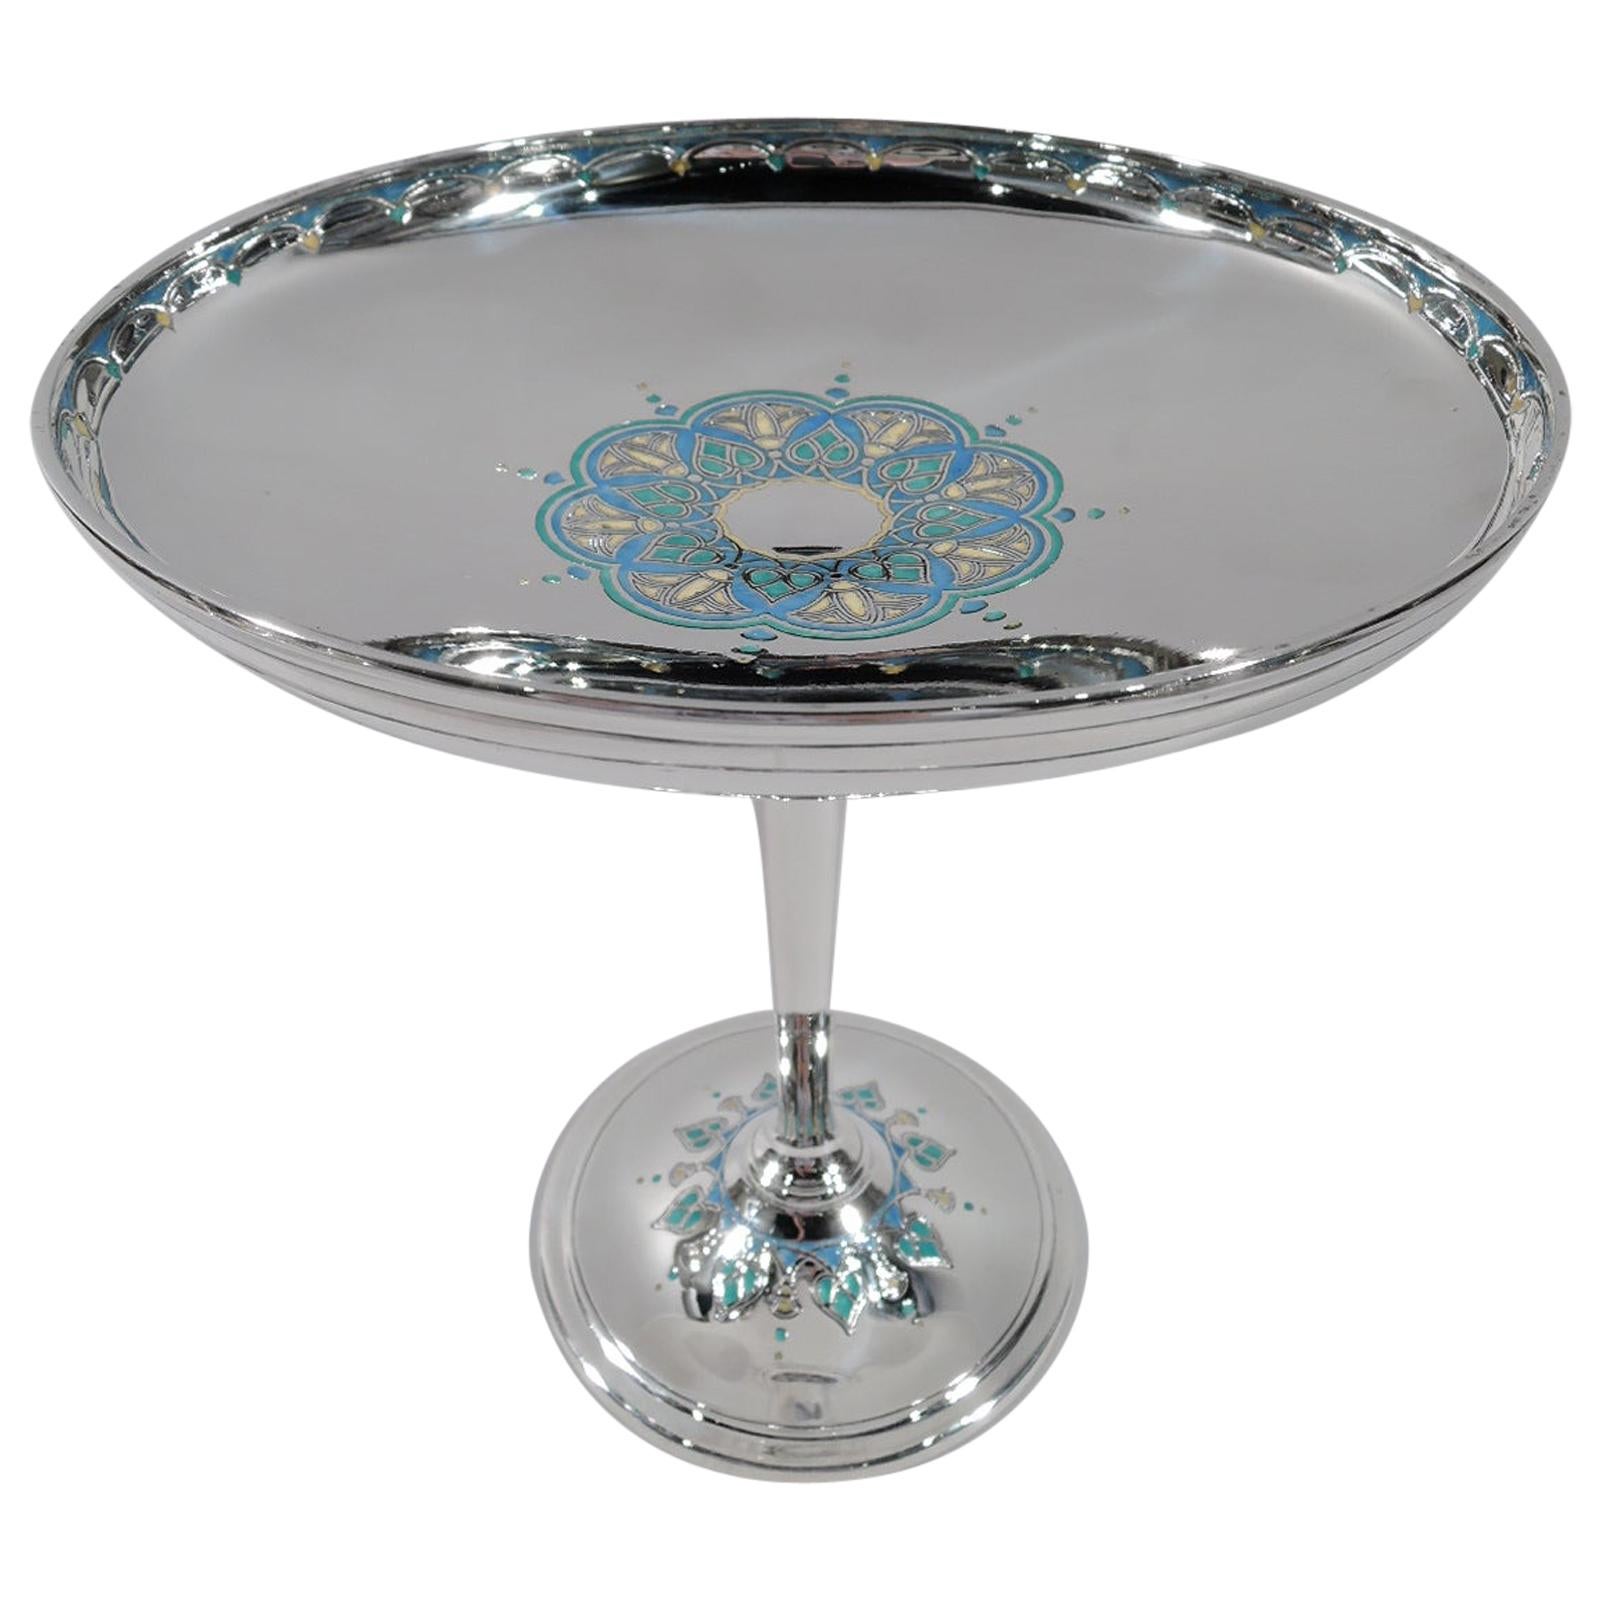 Tiffany American Art Deco Sterling Silver and Enamel Compote